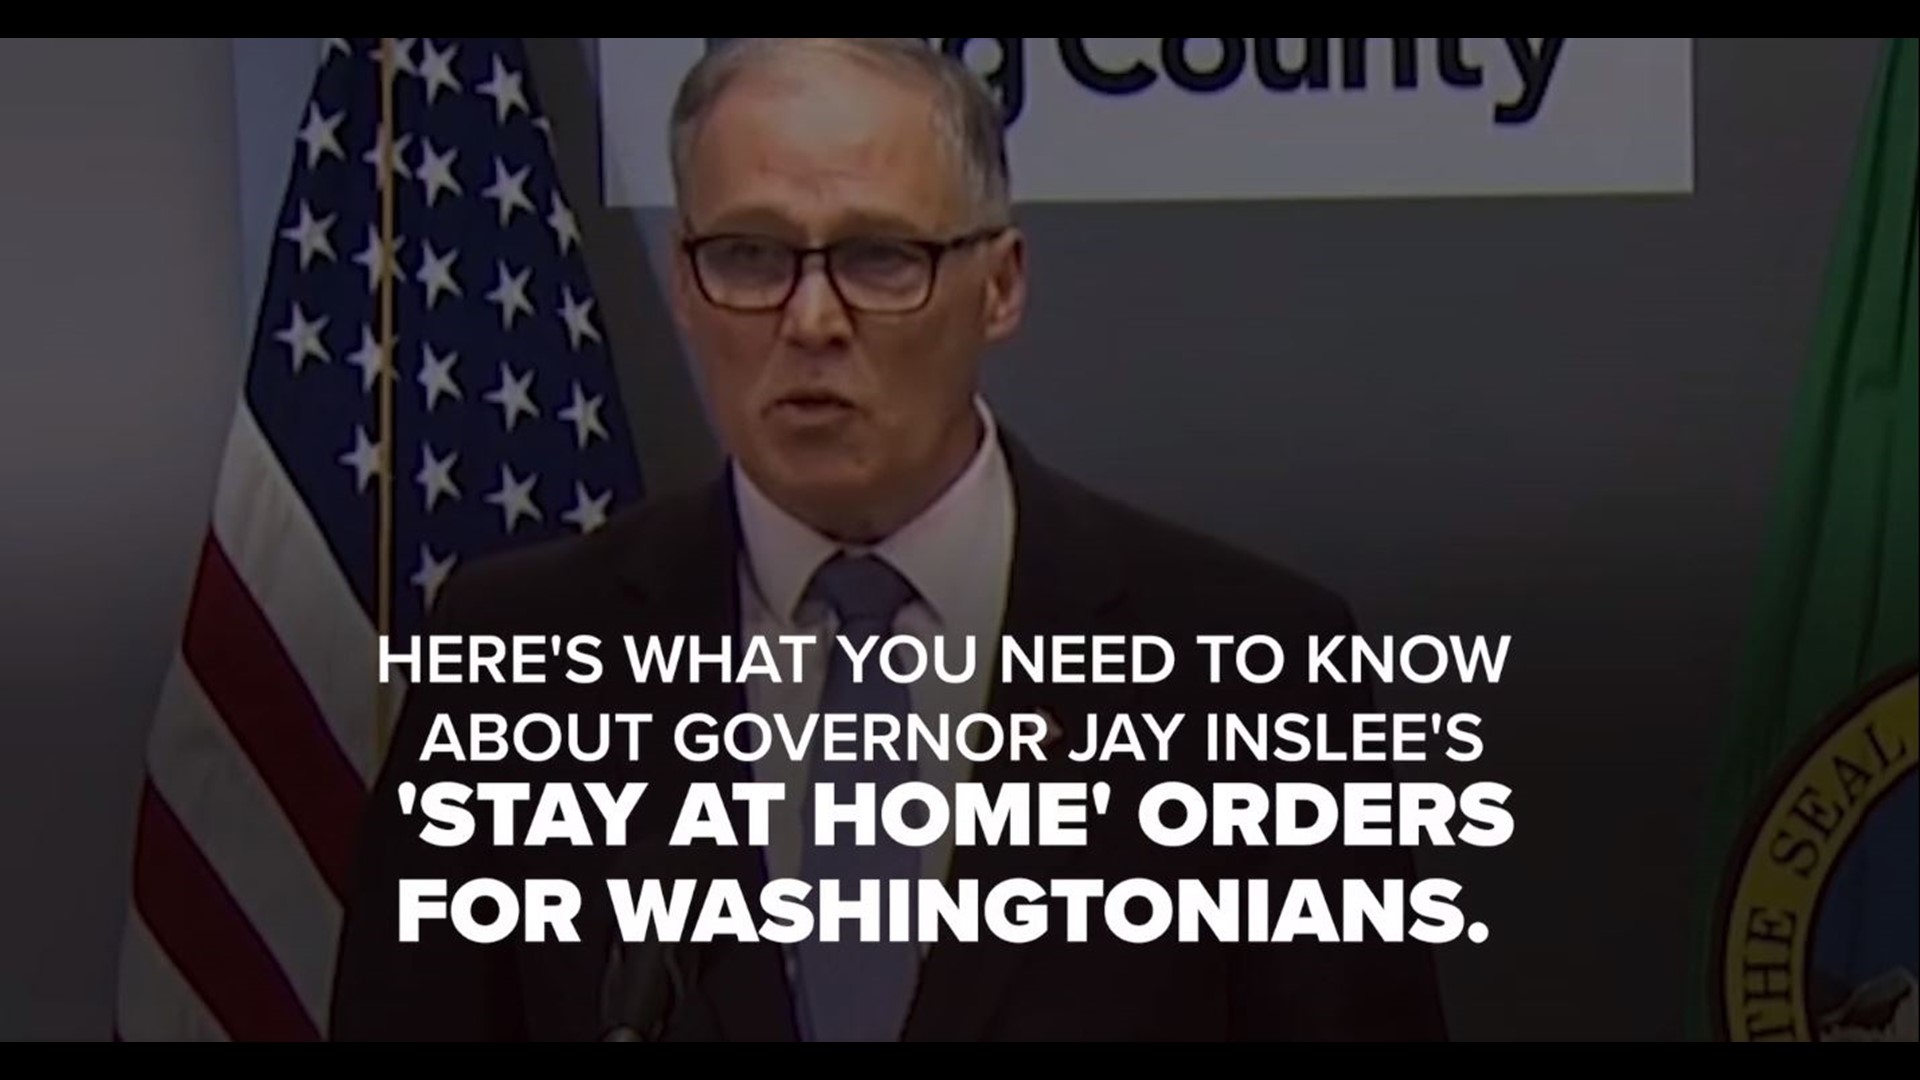 What does Washington governor Jay Inslee's "stay at home" order mean for citizens?